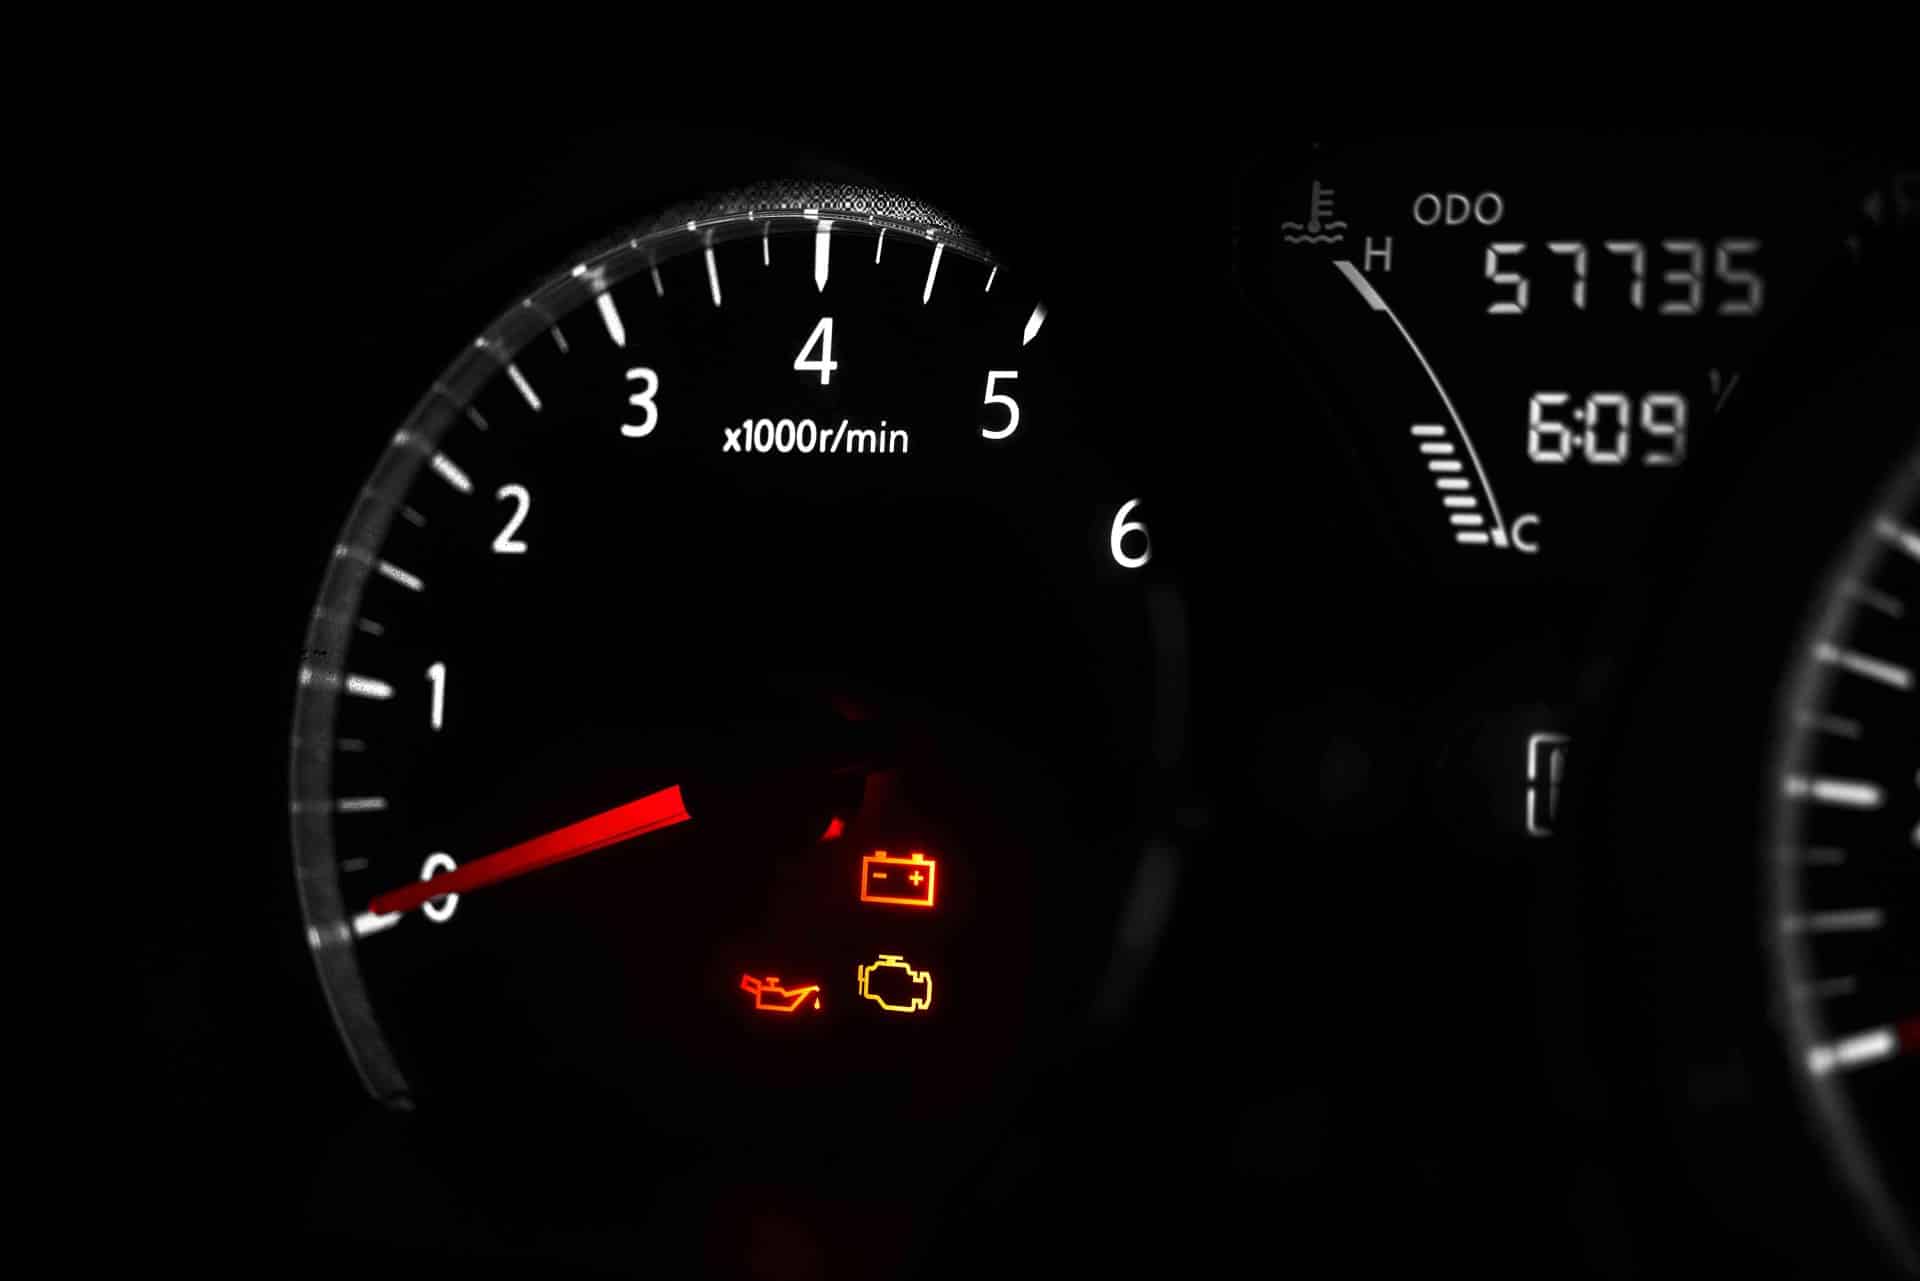 Close-up of a car's dashboard at night, showing a glowing red needle on the tachometer with an engine warning light illuminated. Save up to $60 on wiper blades.